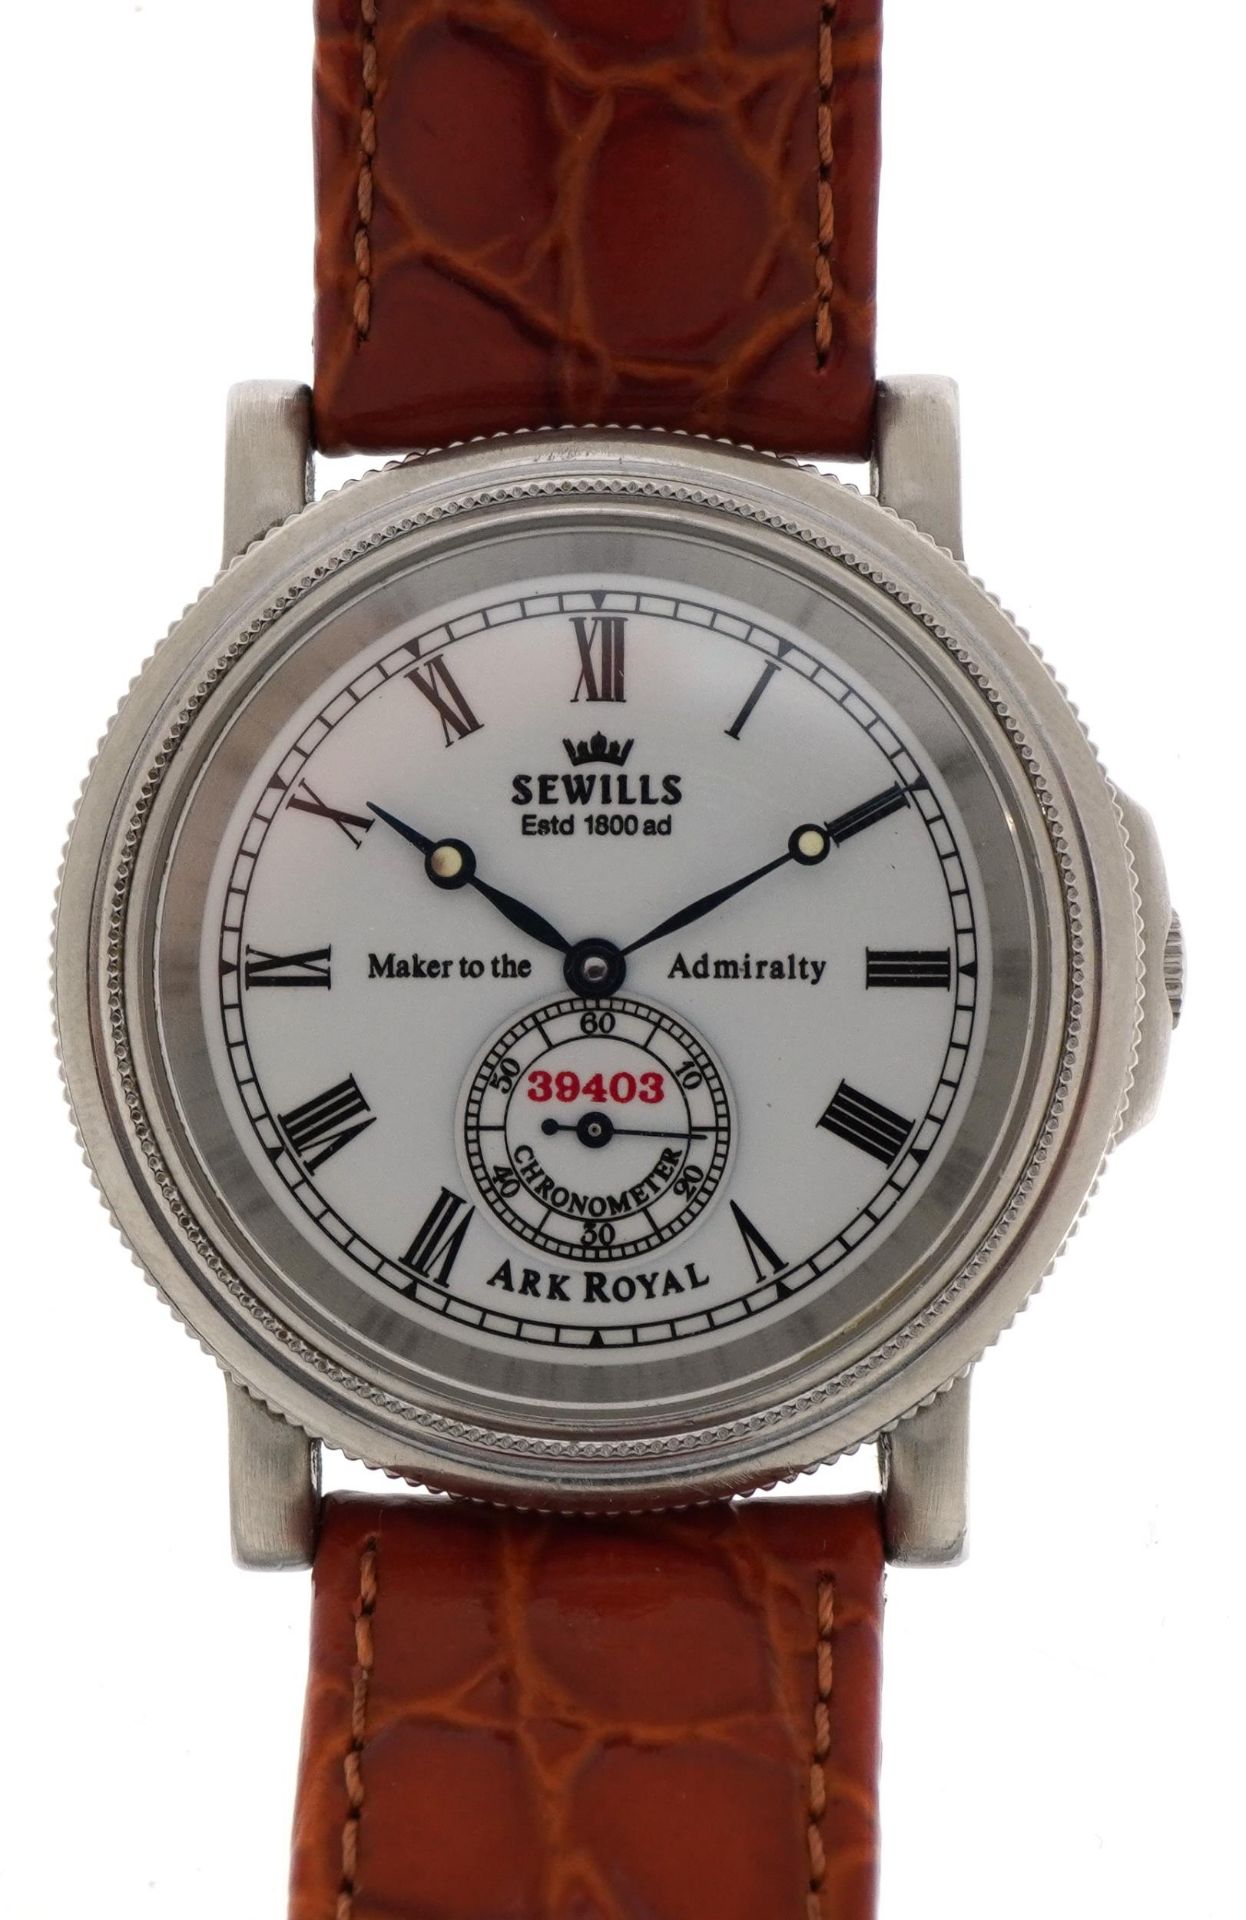 Sewills, gentlemen's Sewills Ark Royal chronometer wristwatch, the movement numbered 0153, 38mm in